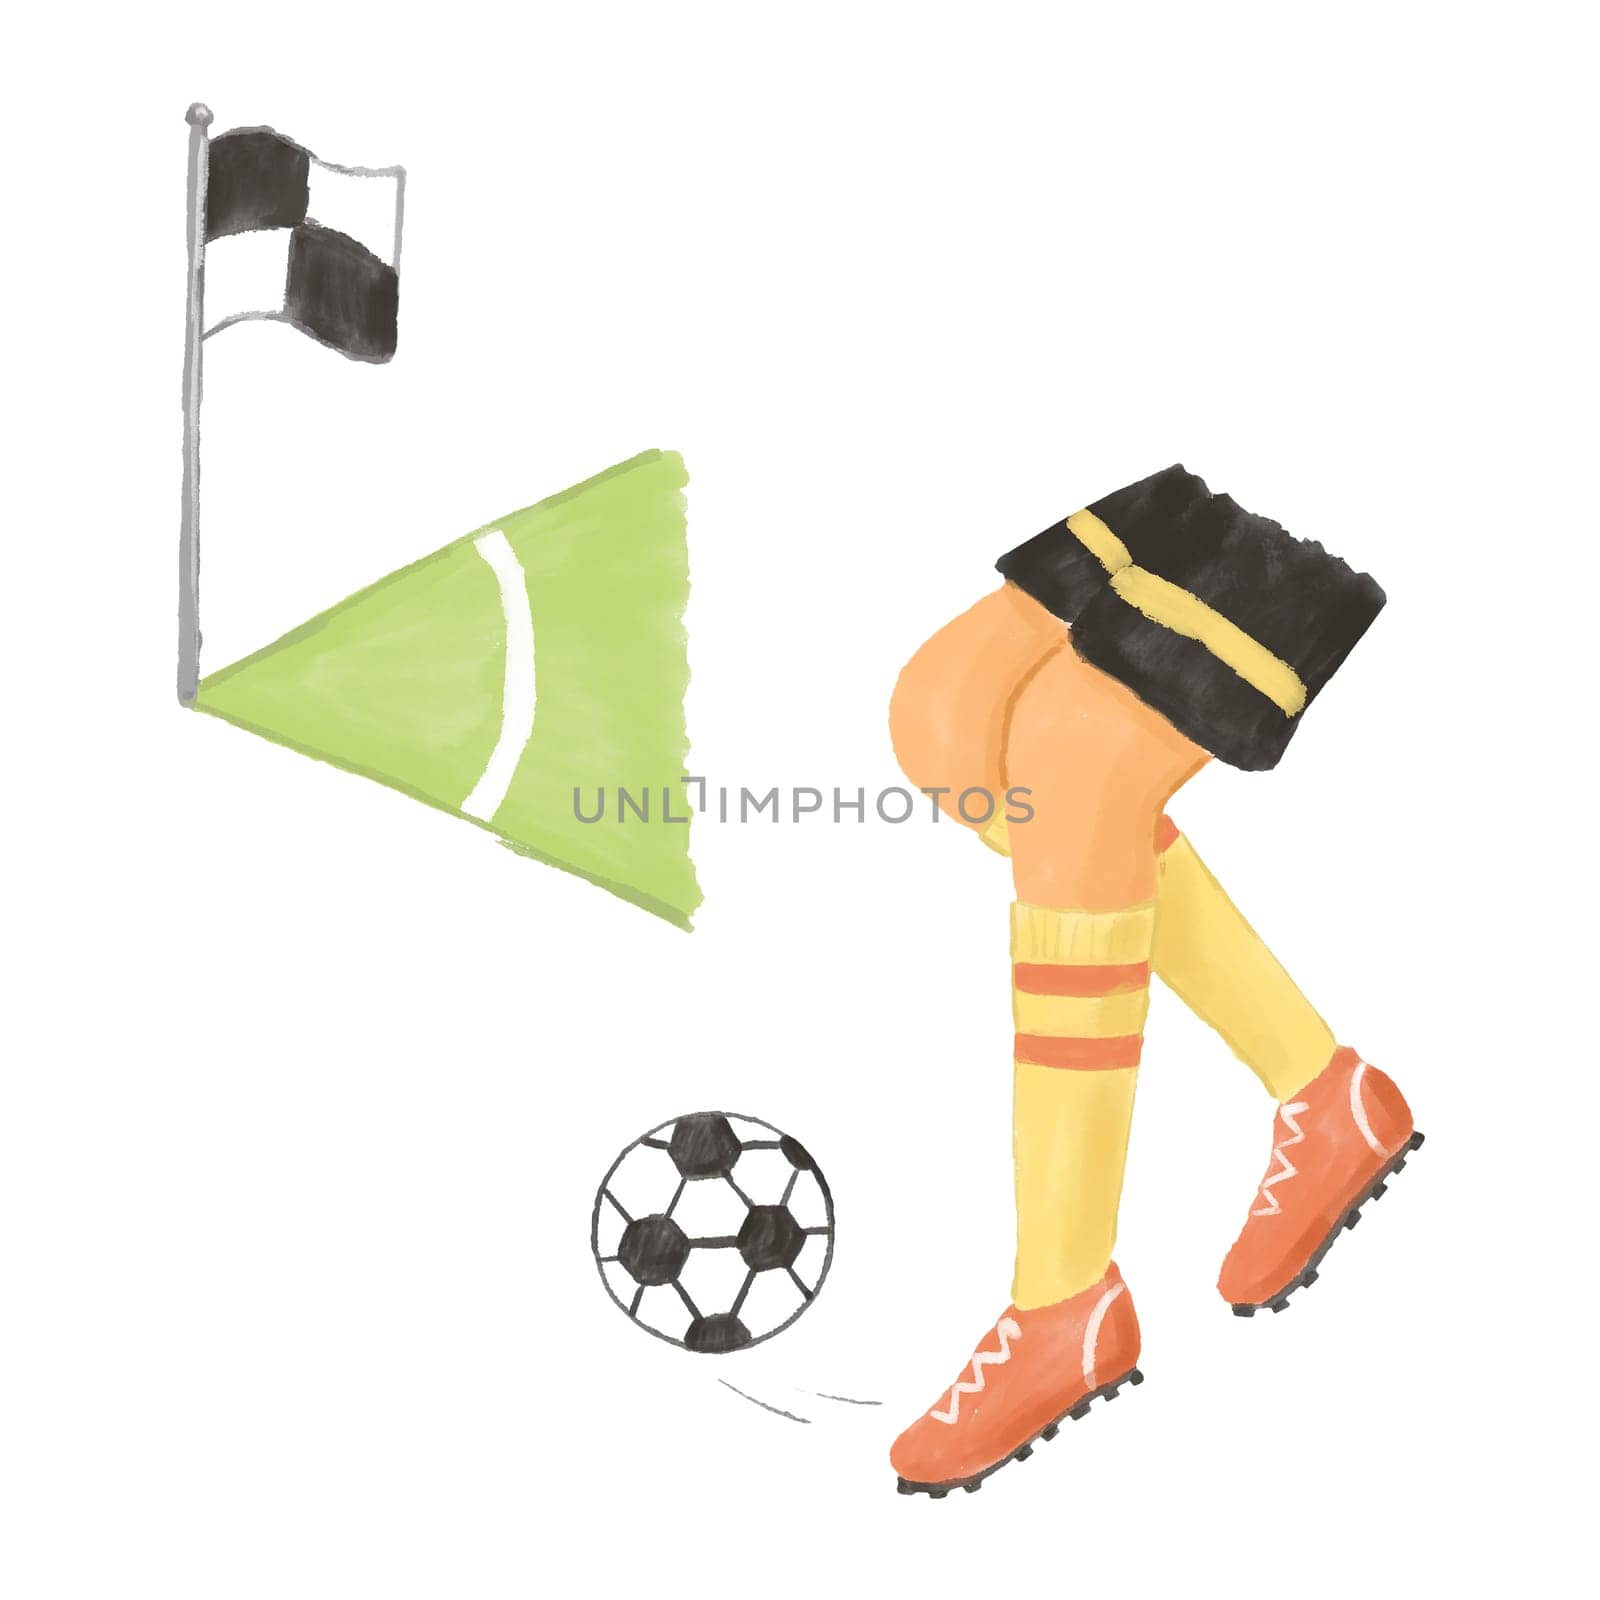 Soccer player illustration isolated on white background. Feet of football player with ball. Corner of football field with flag.